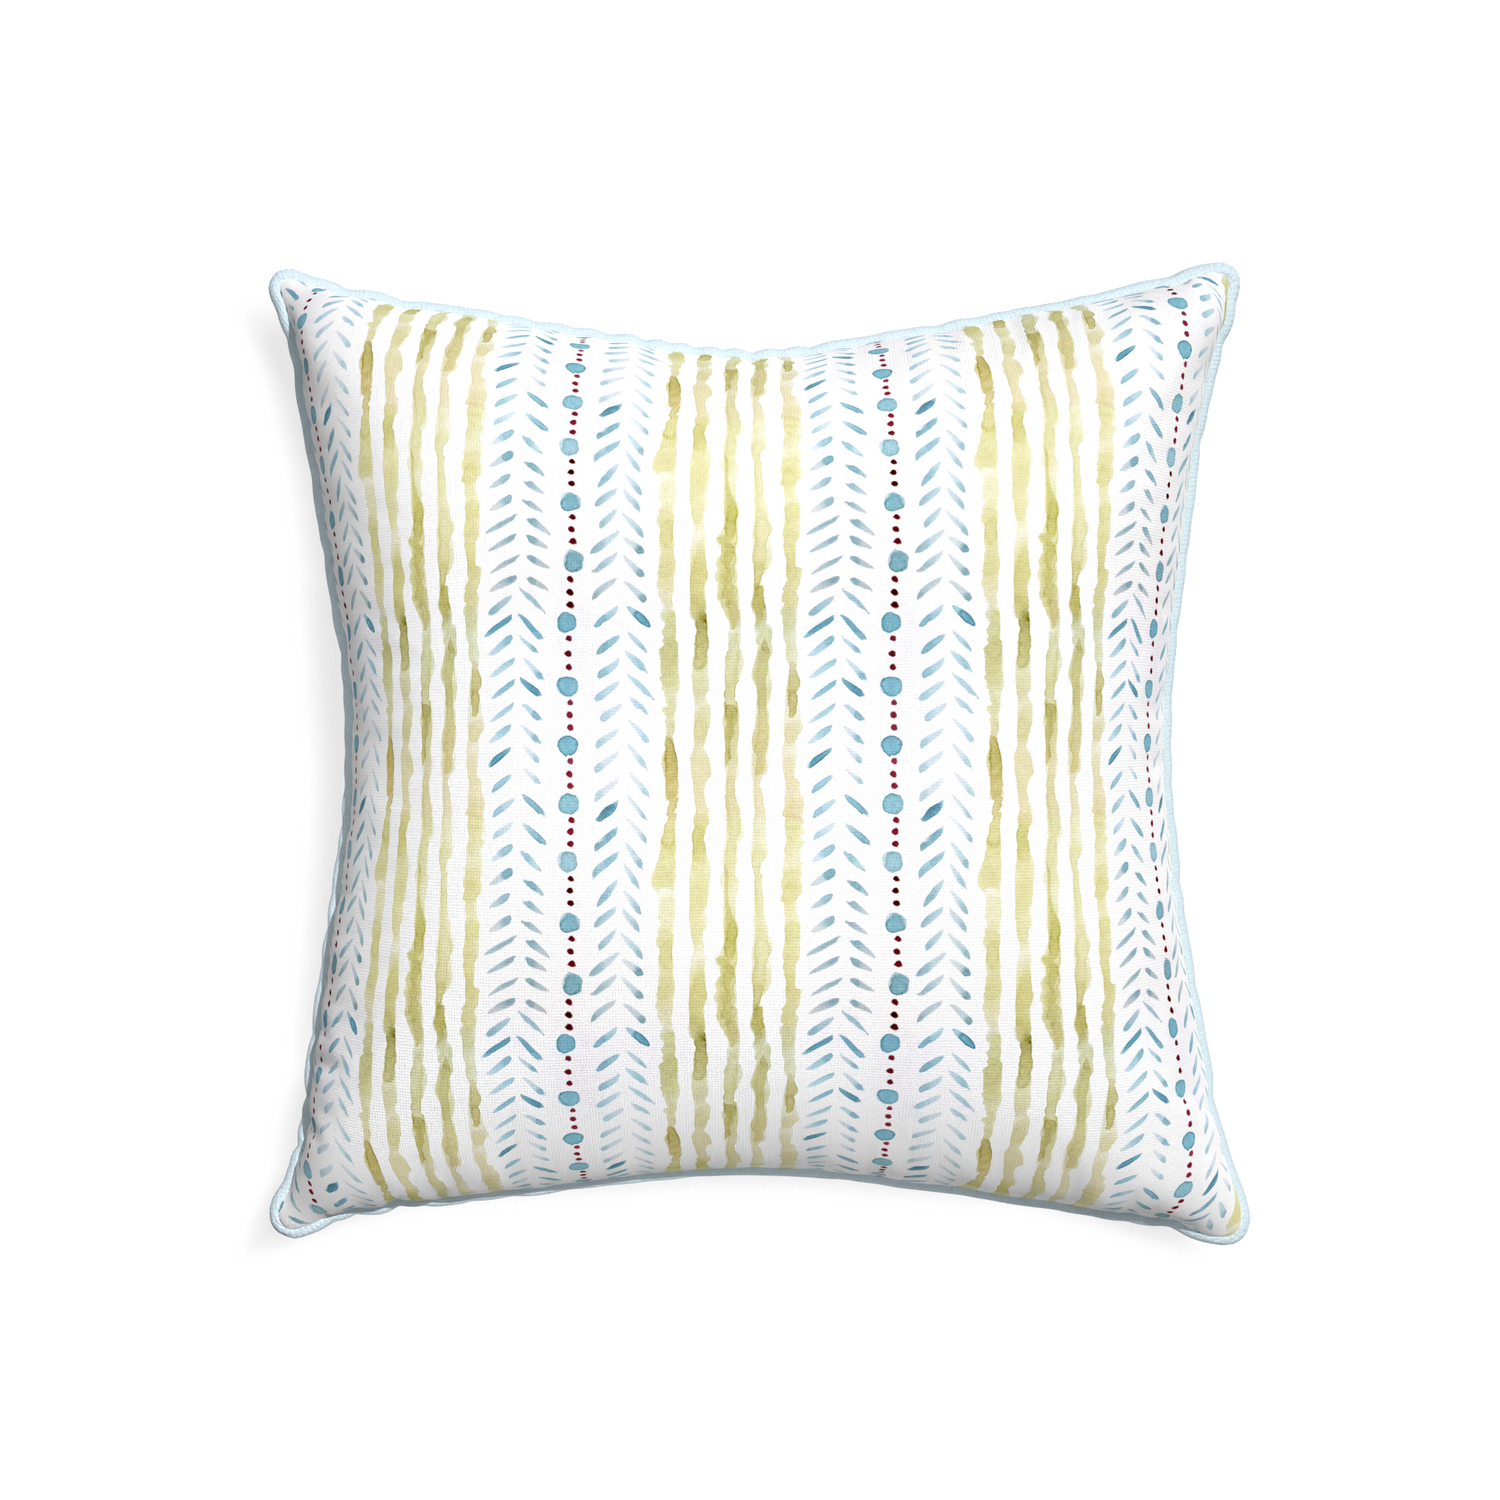 22-square julia custom blue & green stripedpillow with powder piping on white background